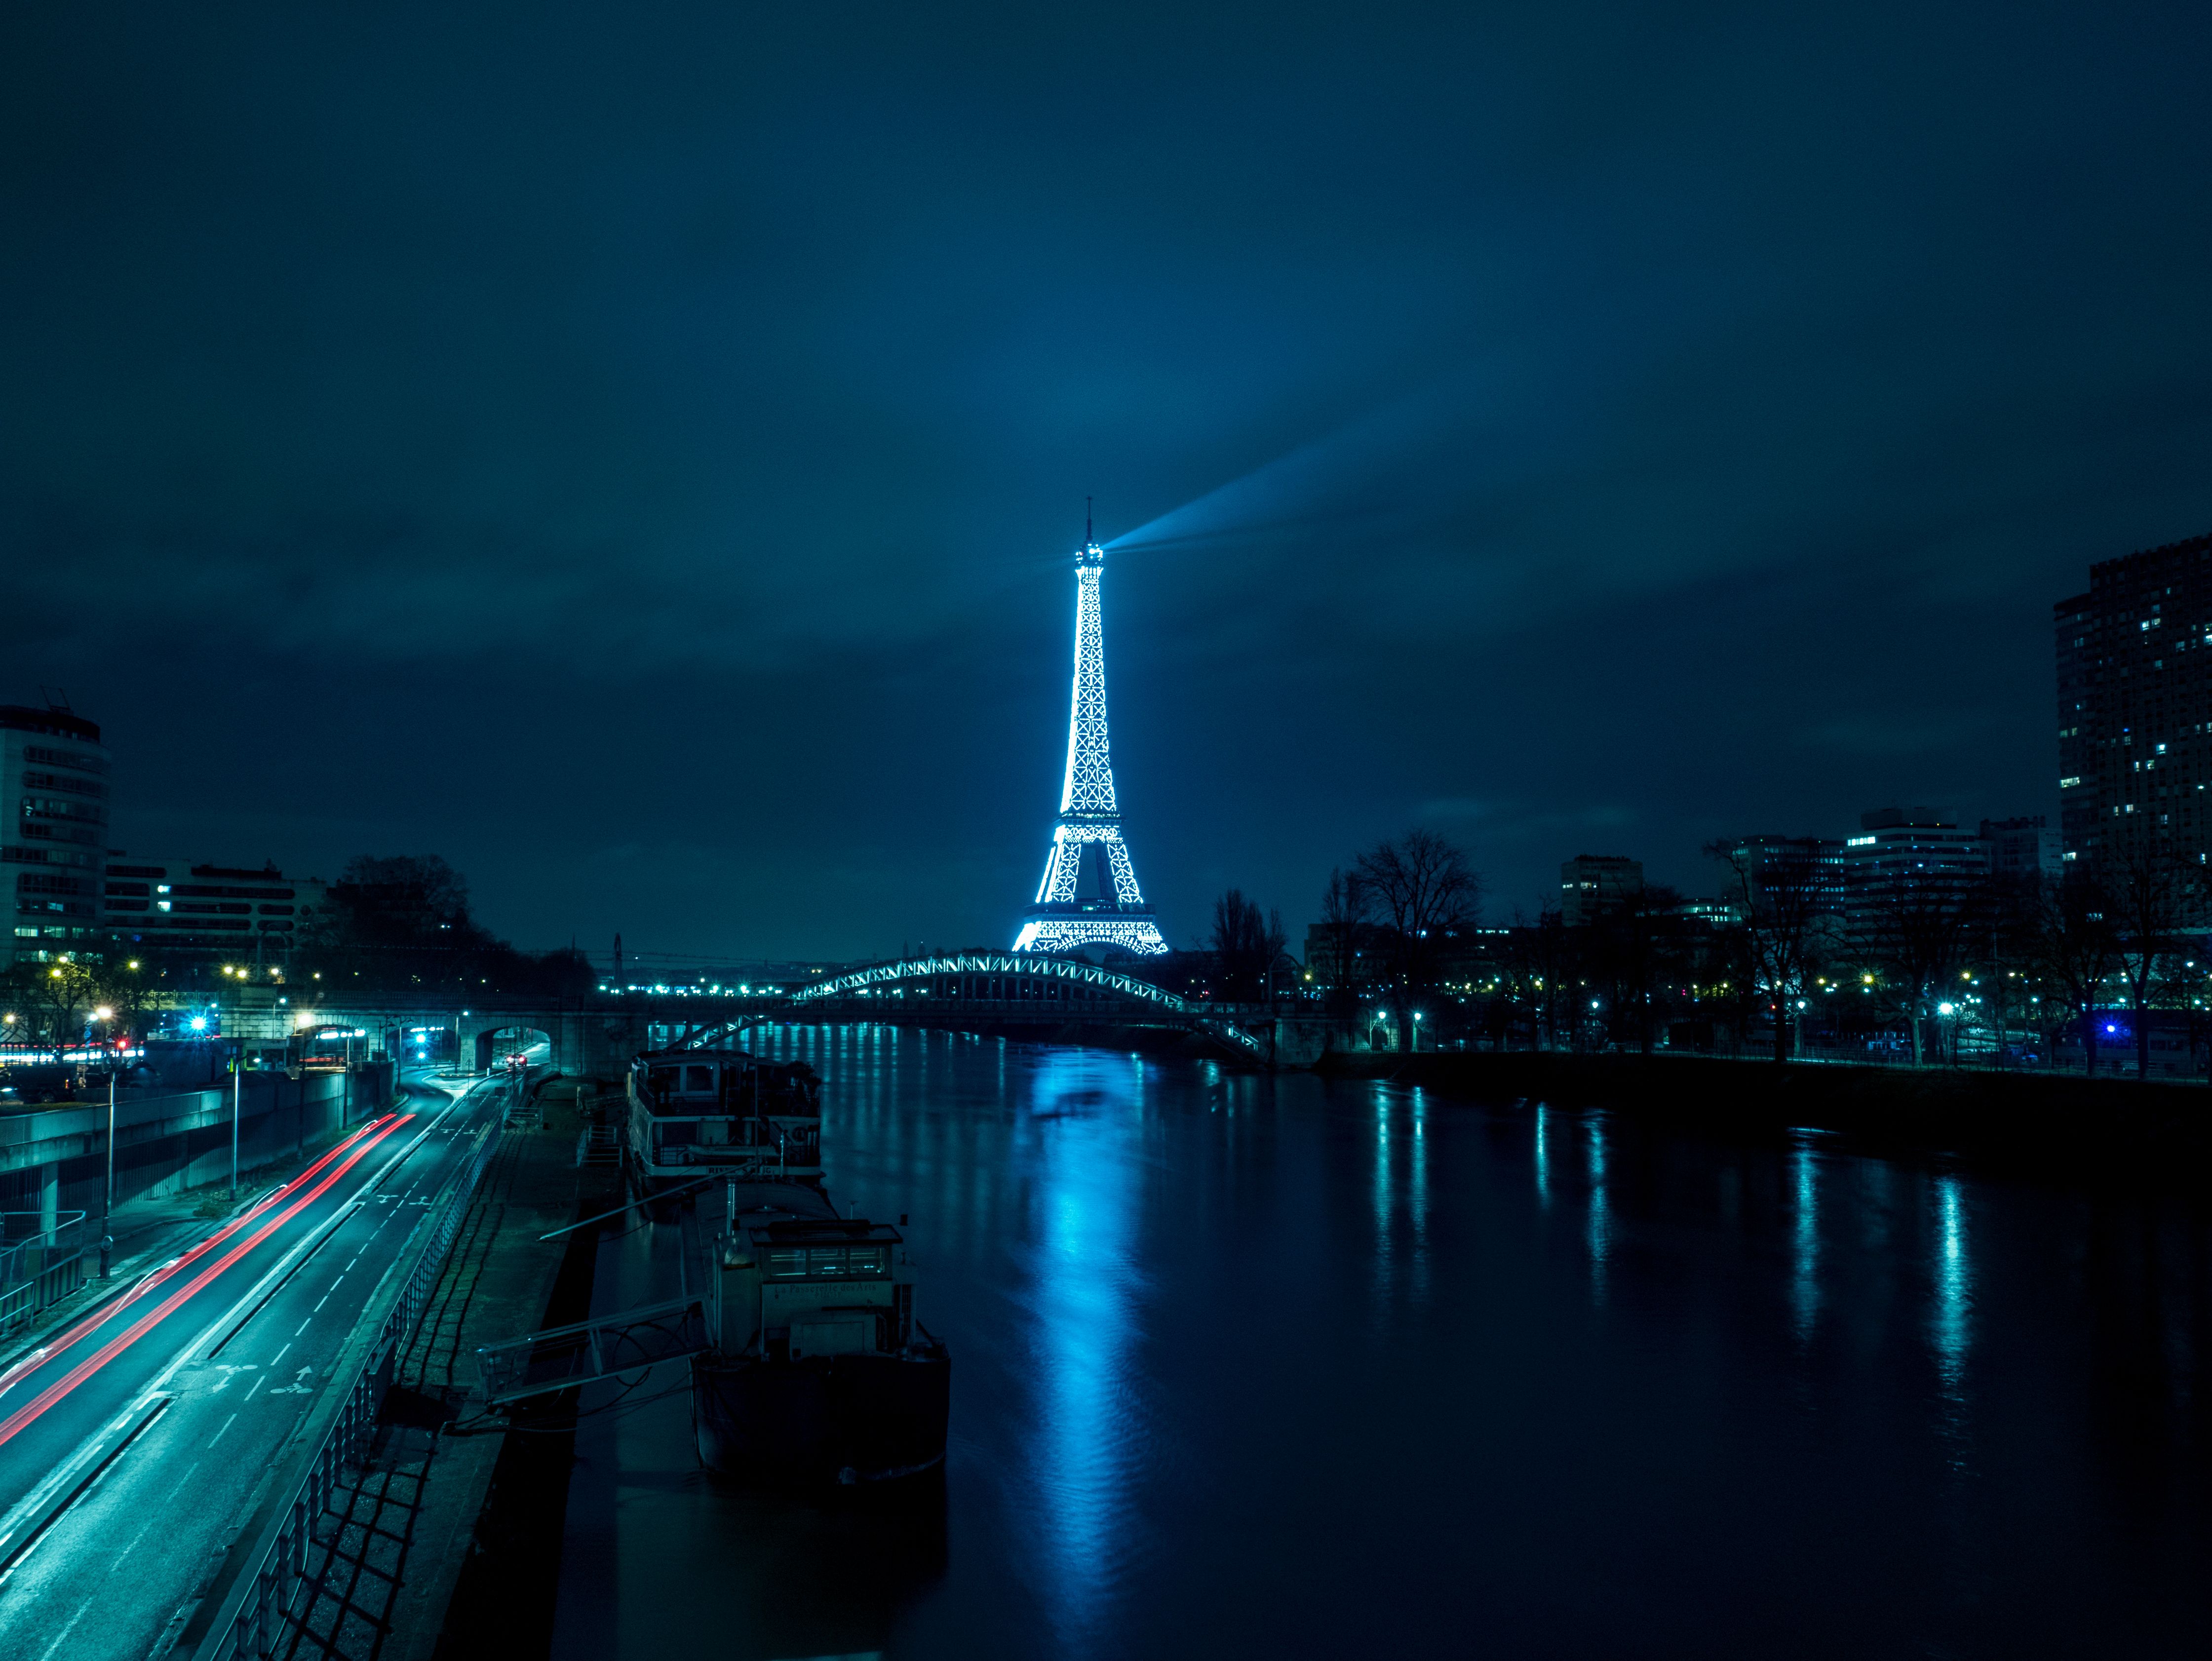 A city at night with the eiffel tower in it - Paris, France